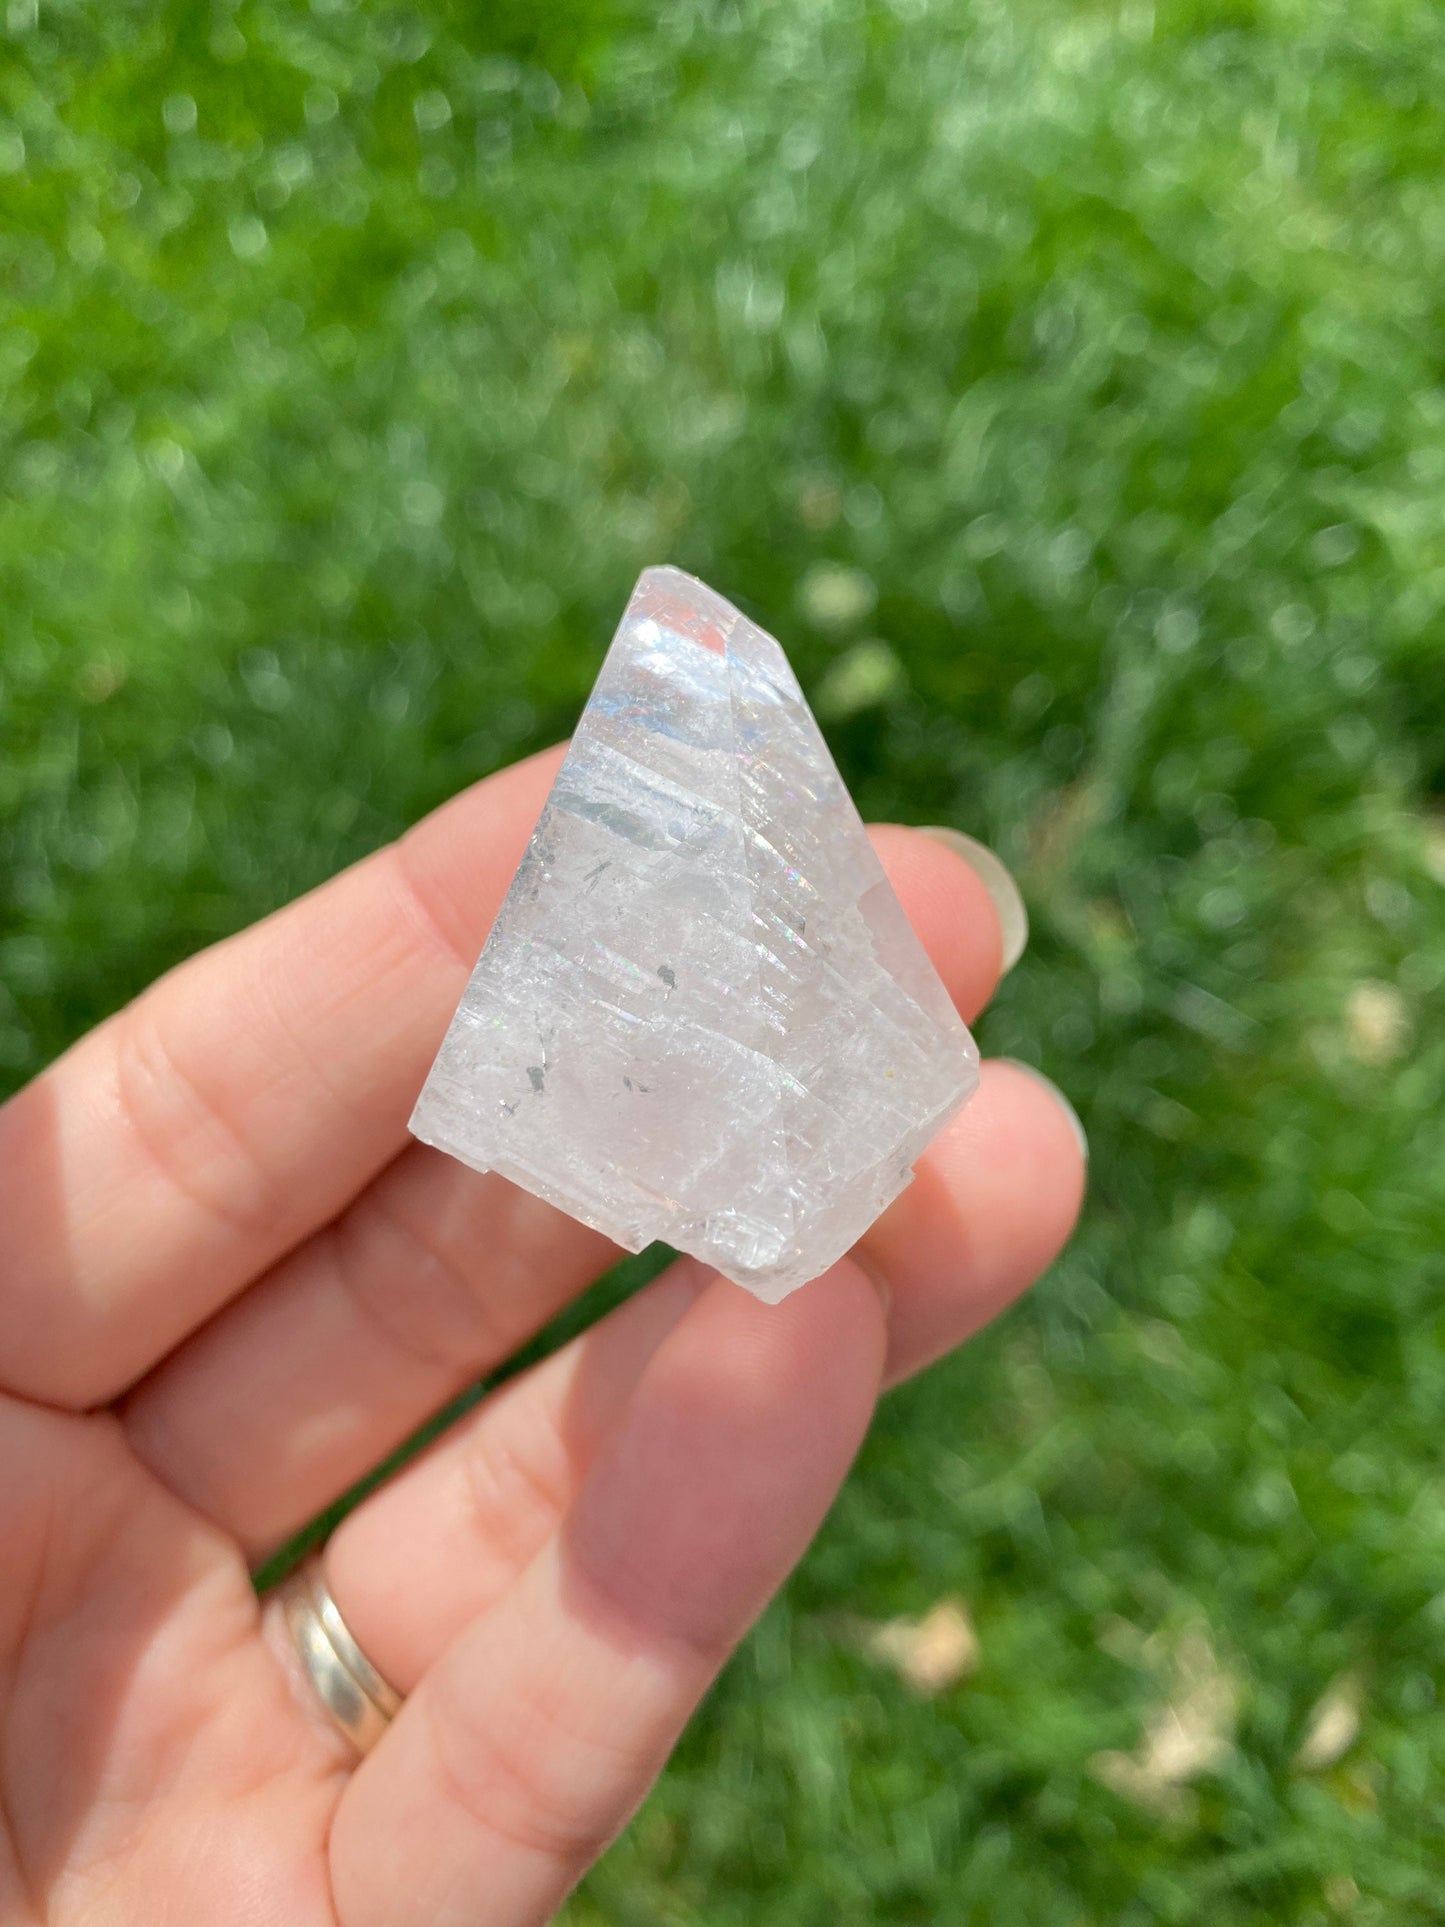 Clear Calcite Crystal Point with lots of Rainbows - Buffalo Iowa - Linwood Mine - Rock Shop